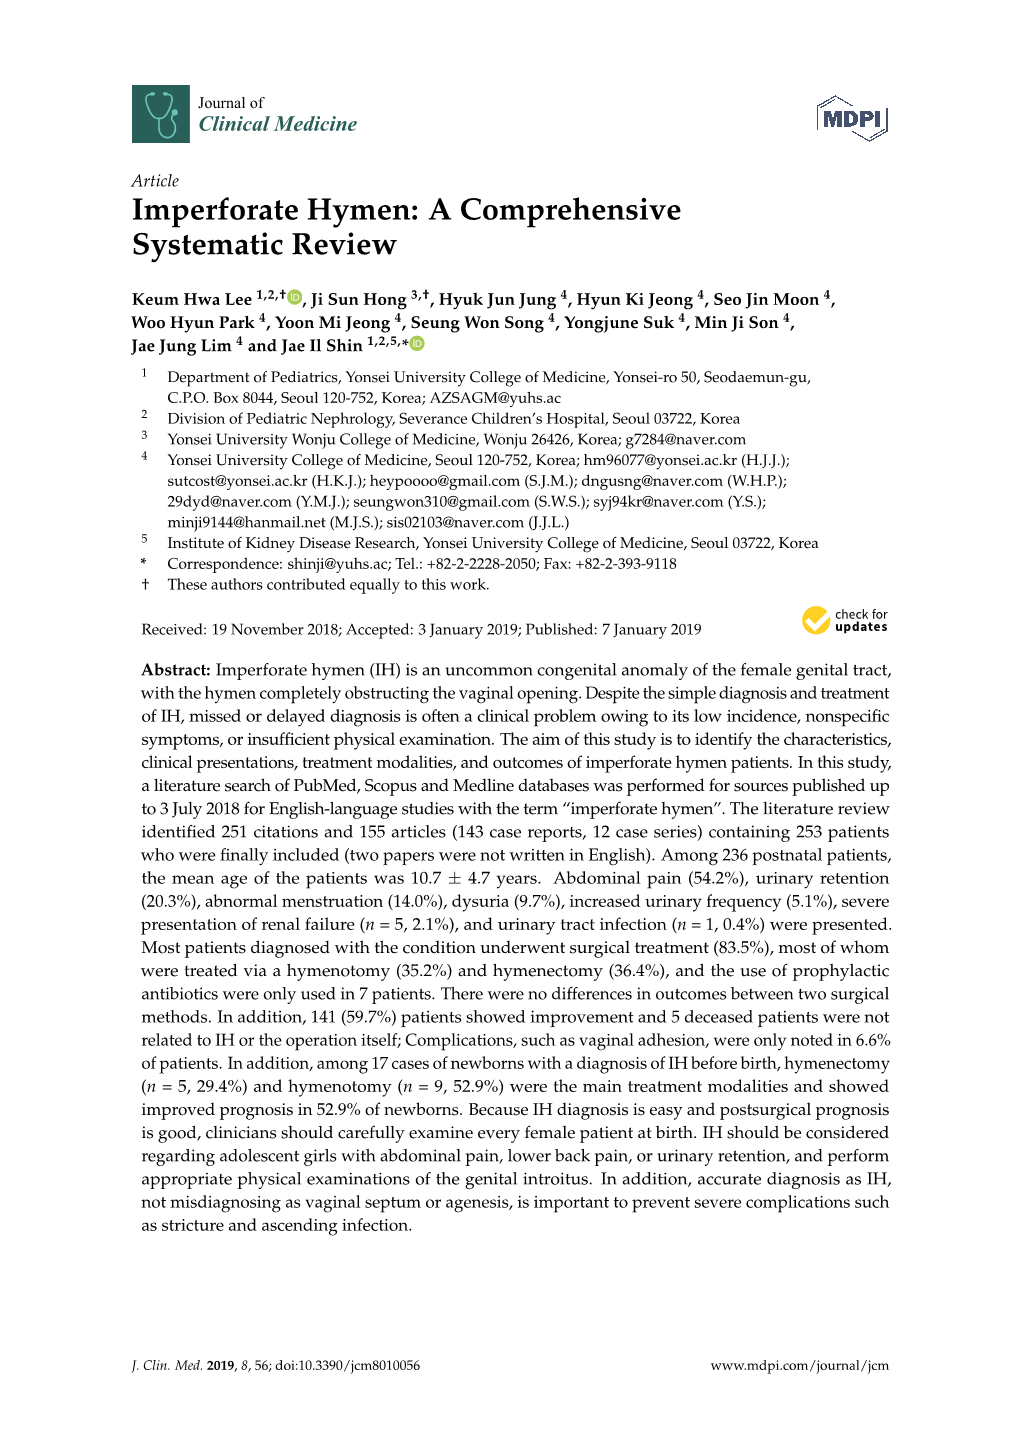 Imperforate Hymen: a Comprehensive Systematic Review